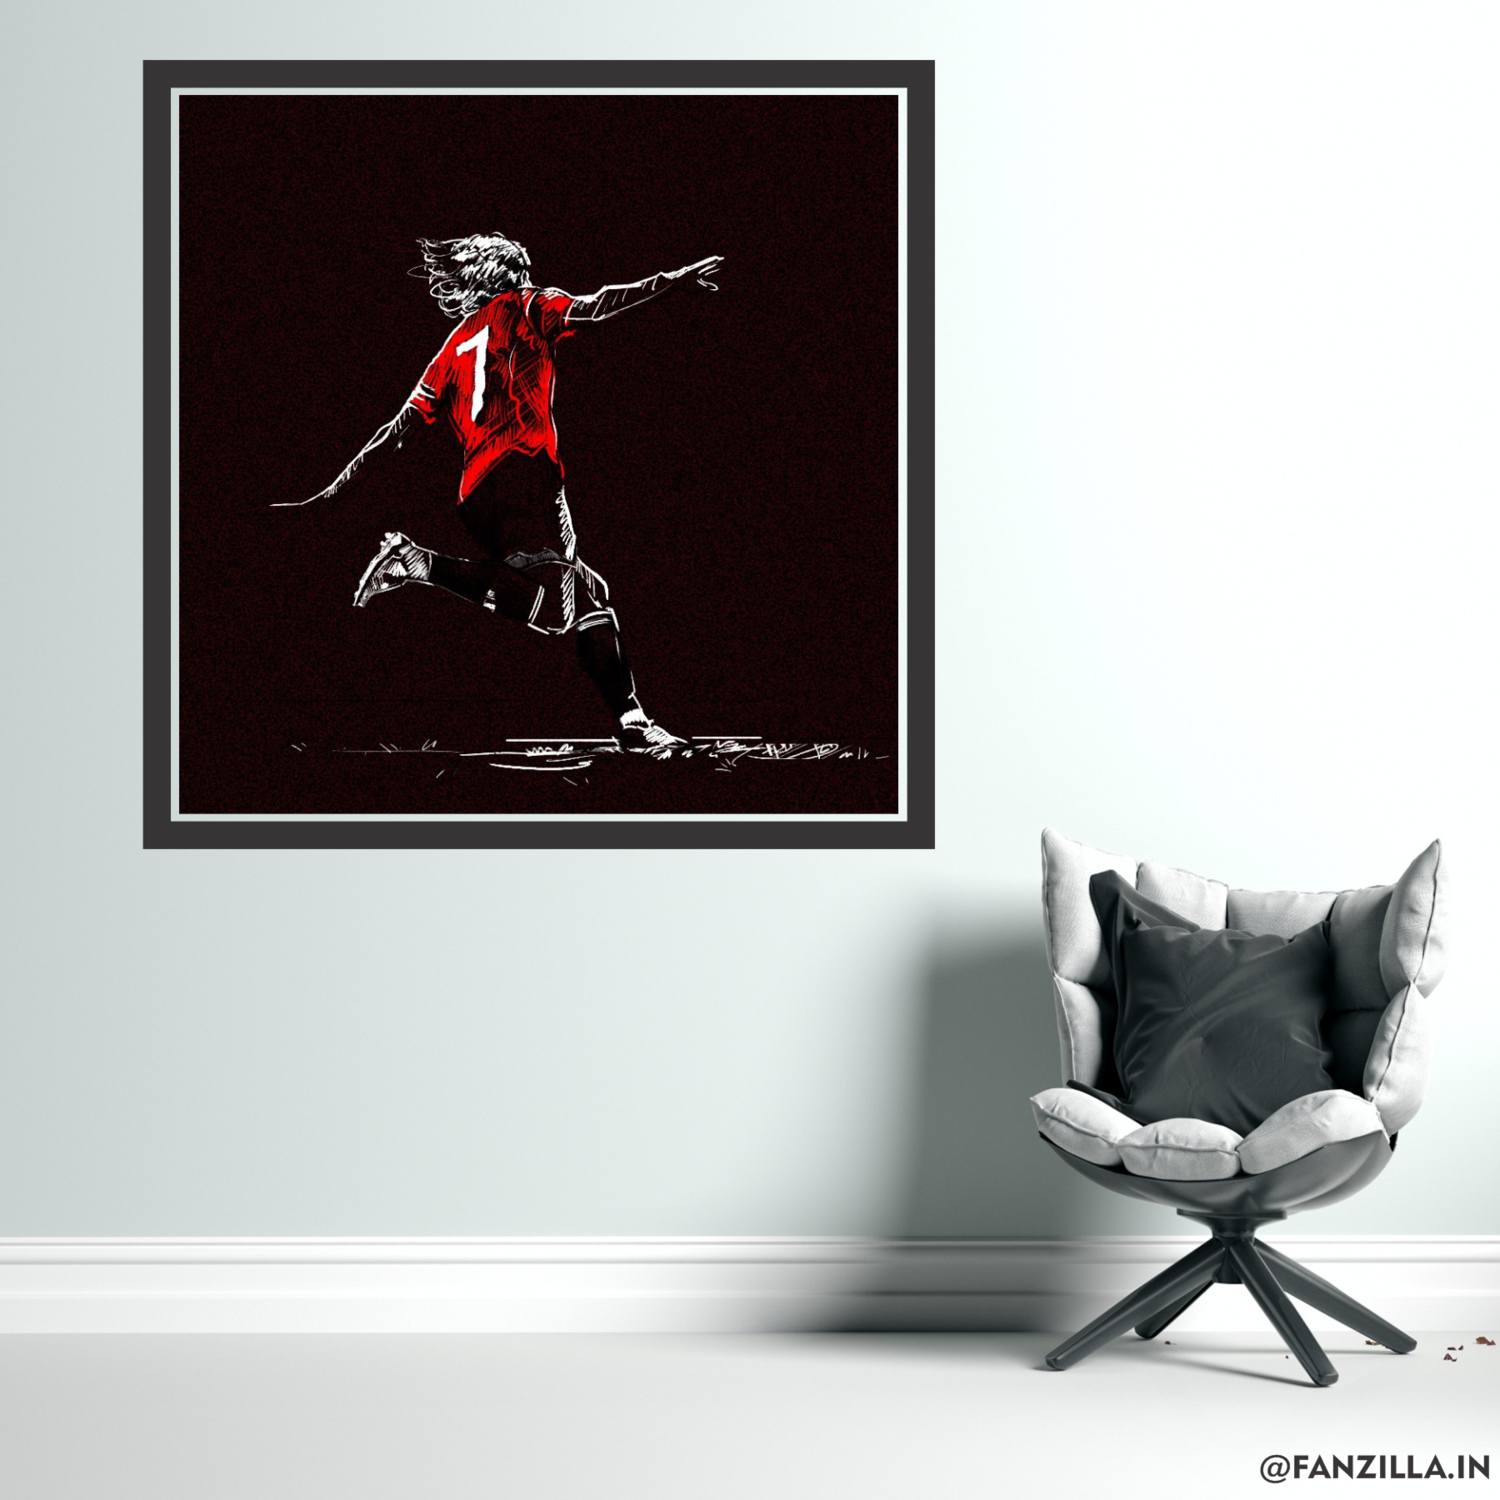 Cavani - 'Catch Me If You Can' Graphic Wall Art